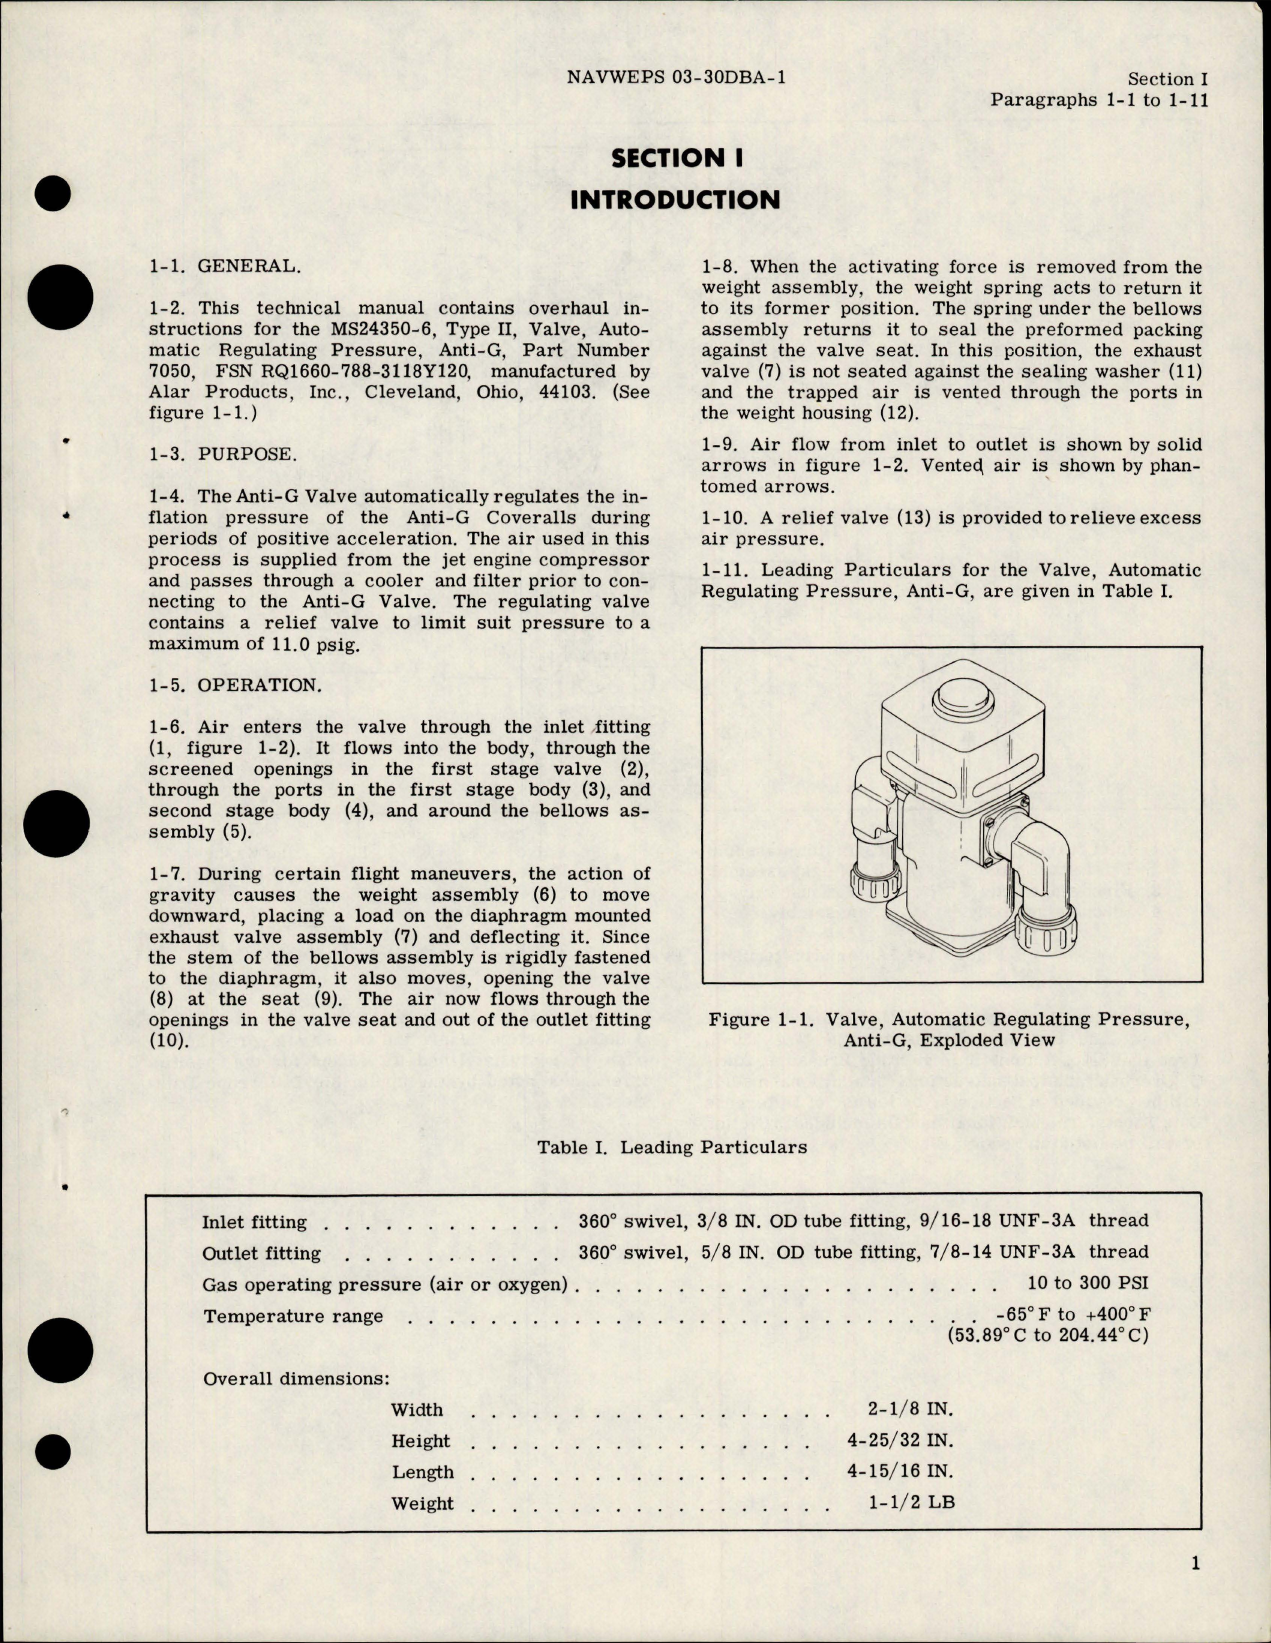 Sample page 5 from AirCorps Library document: Overhaul Instructions for Automatic Pressure Regulating Anti-G Valve - MS24350-6 - Type III - Model 7050 